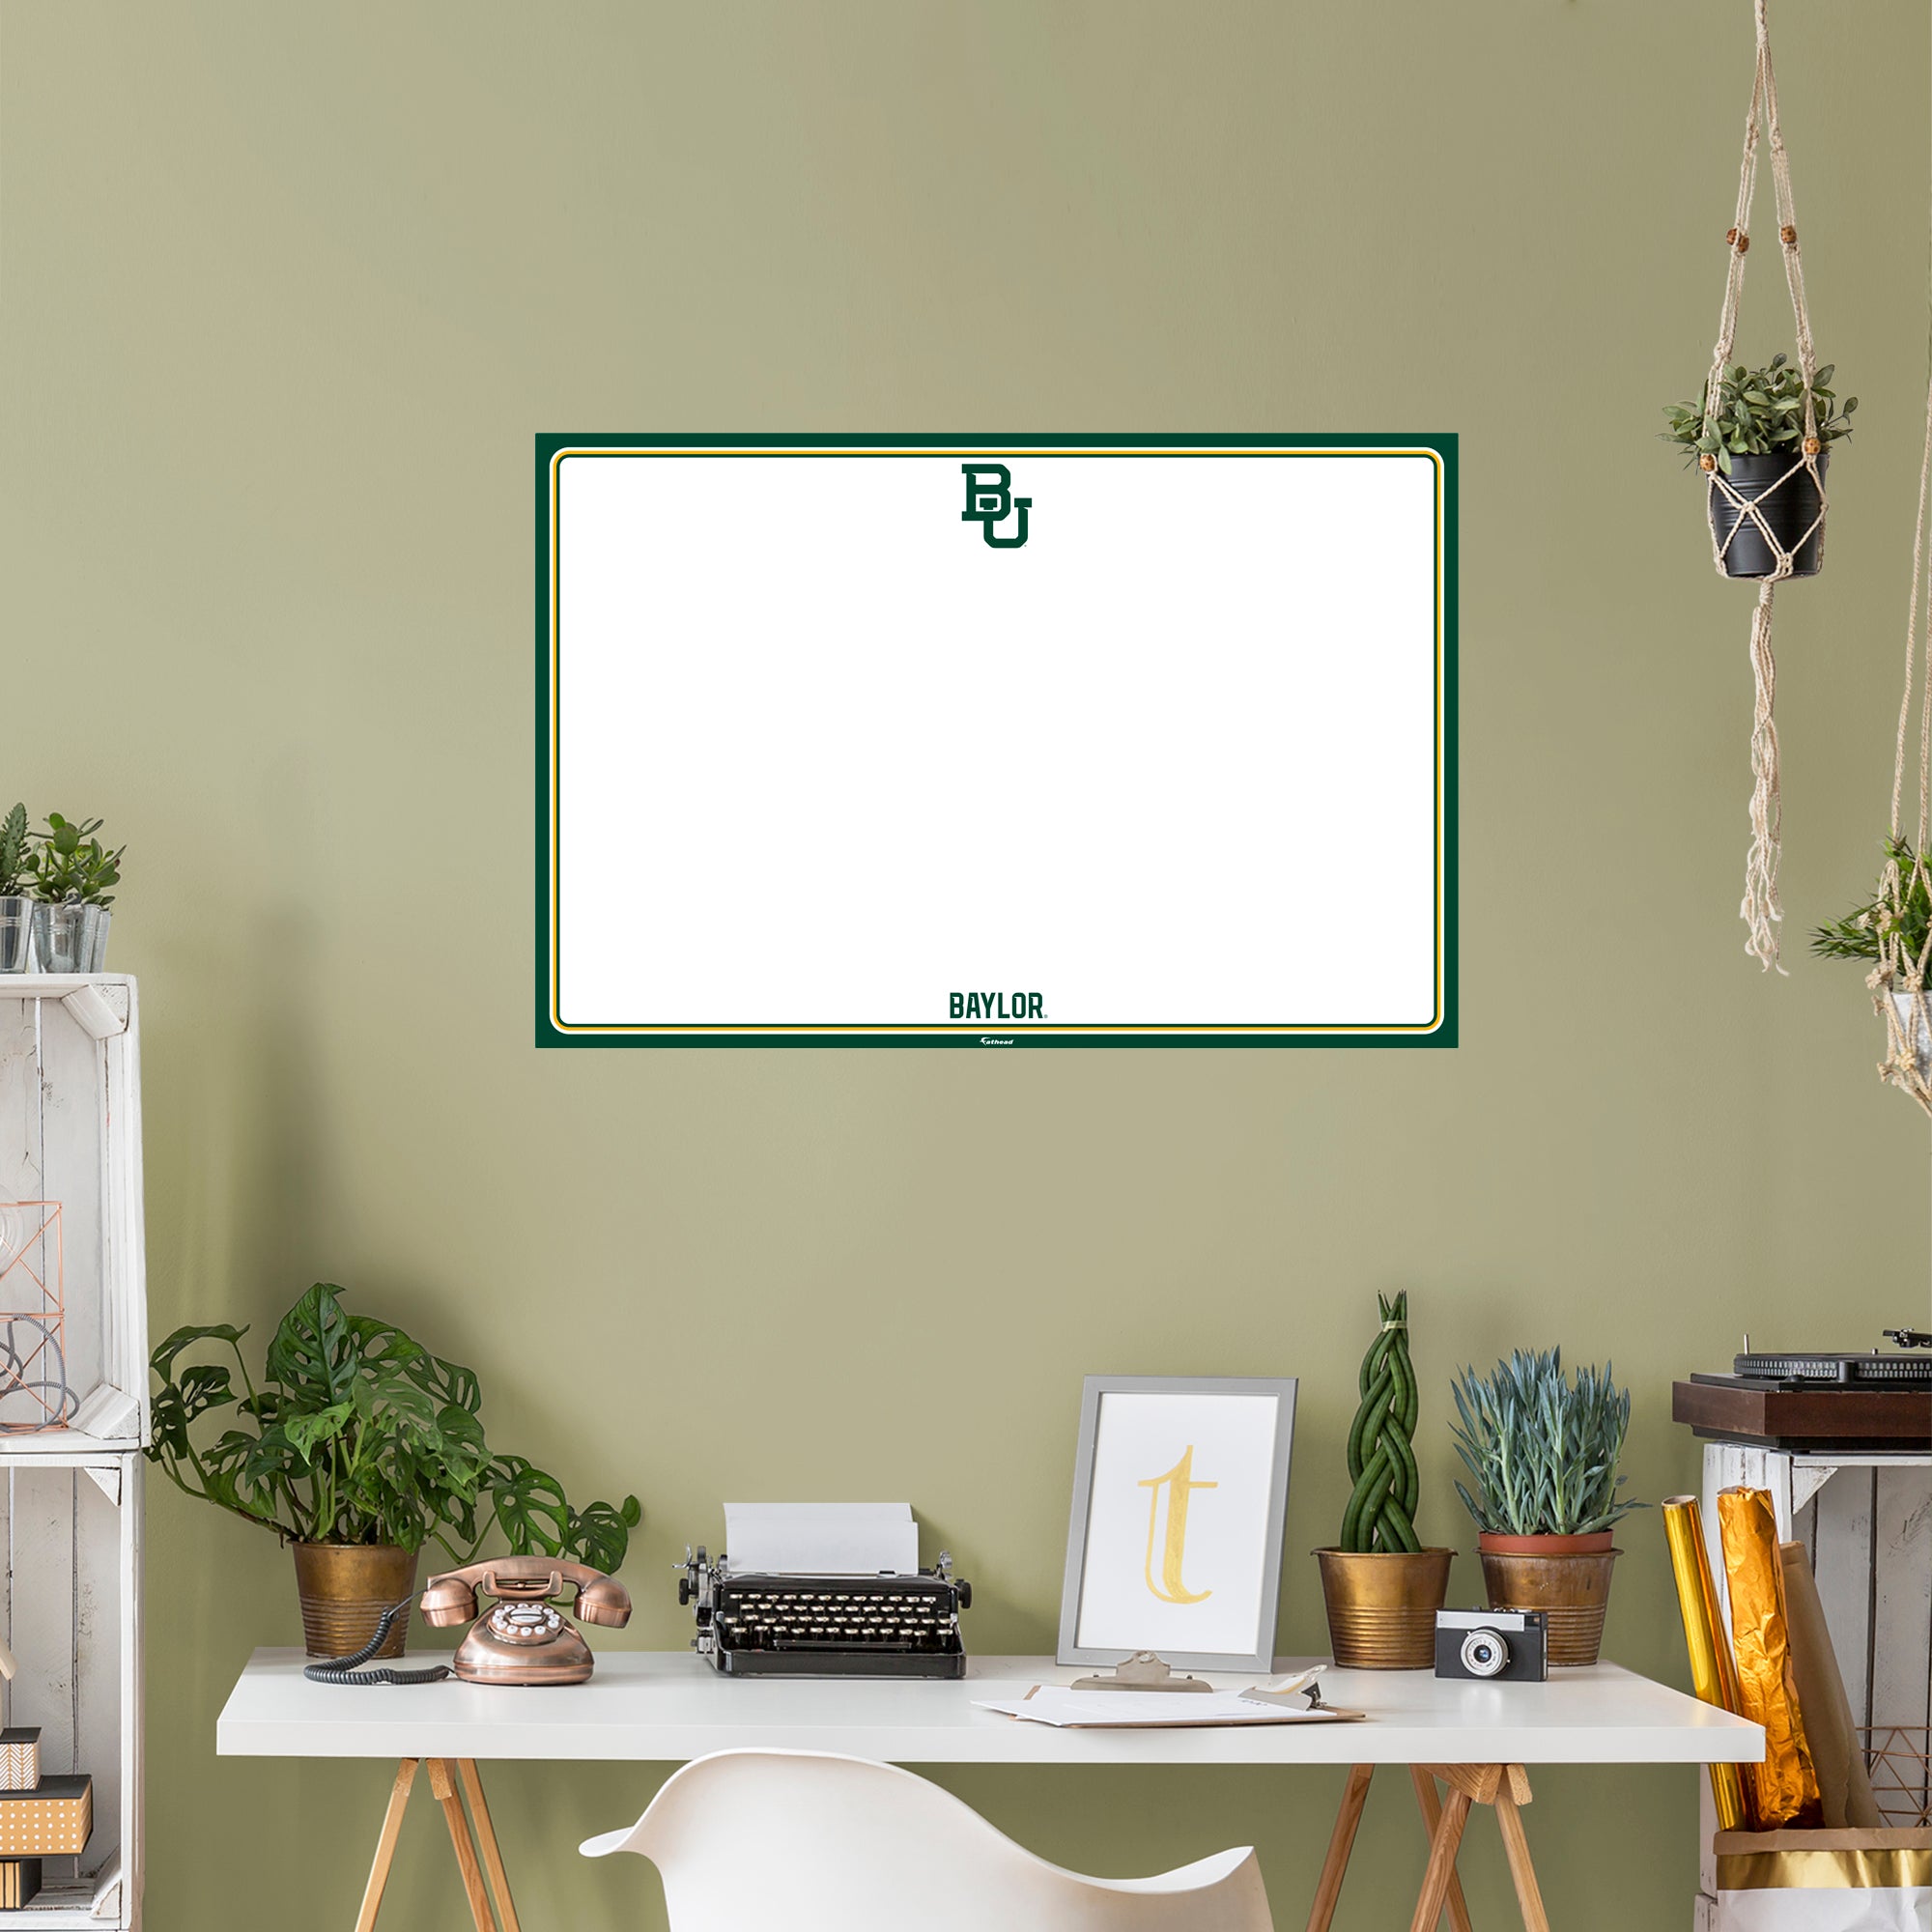 Baylor Bears 2020 X-Large Dry Erase Whiteboard - Officially Licensed NCAA Removable Wall Decal XL by Fathead | Vinyl